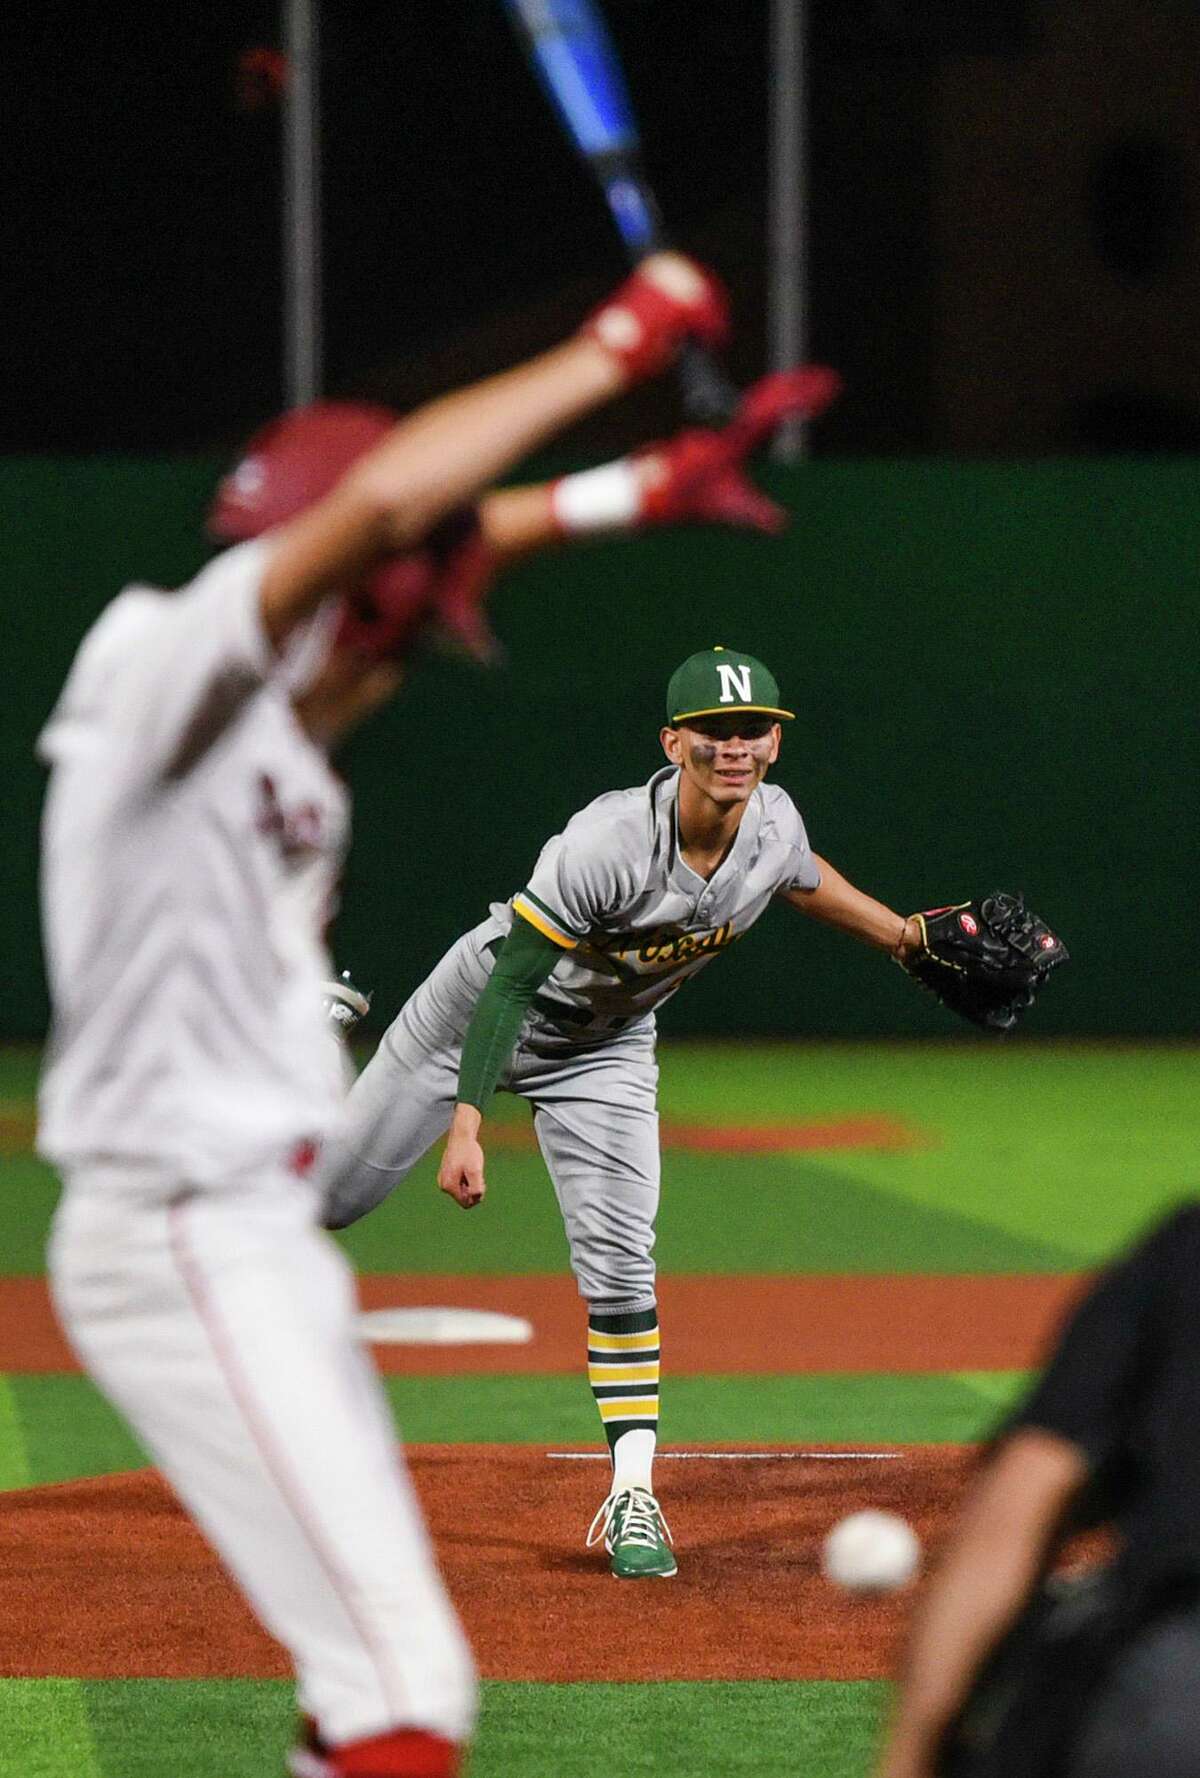 TJ Rogerio and Nixon will open District 29-6A play at 7 p.m. Tuesday against United South at Krueger Field.